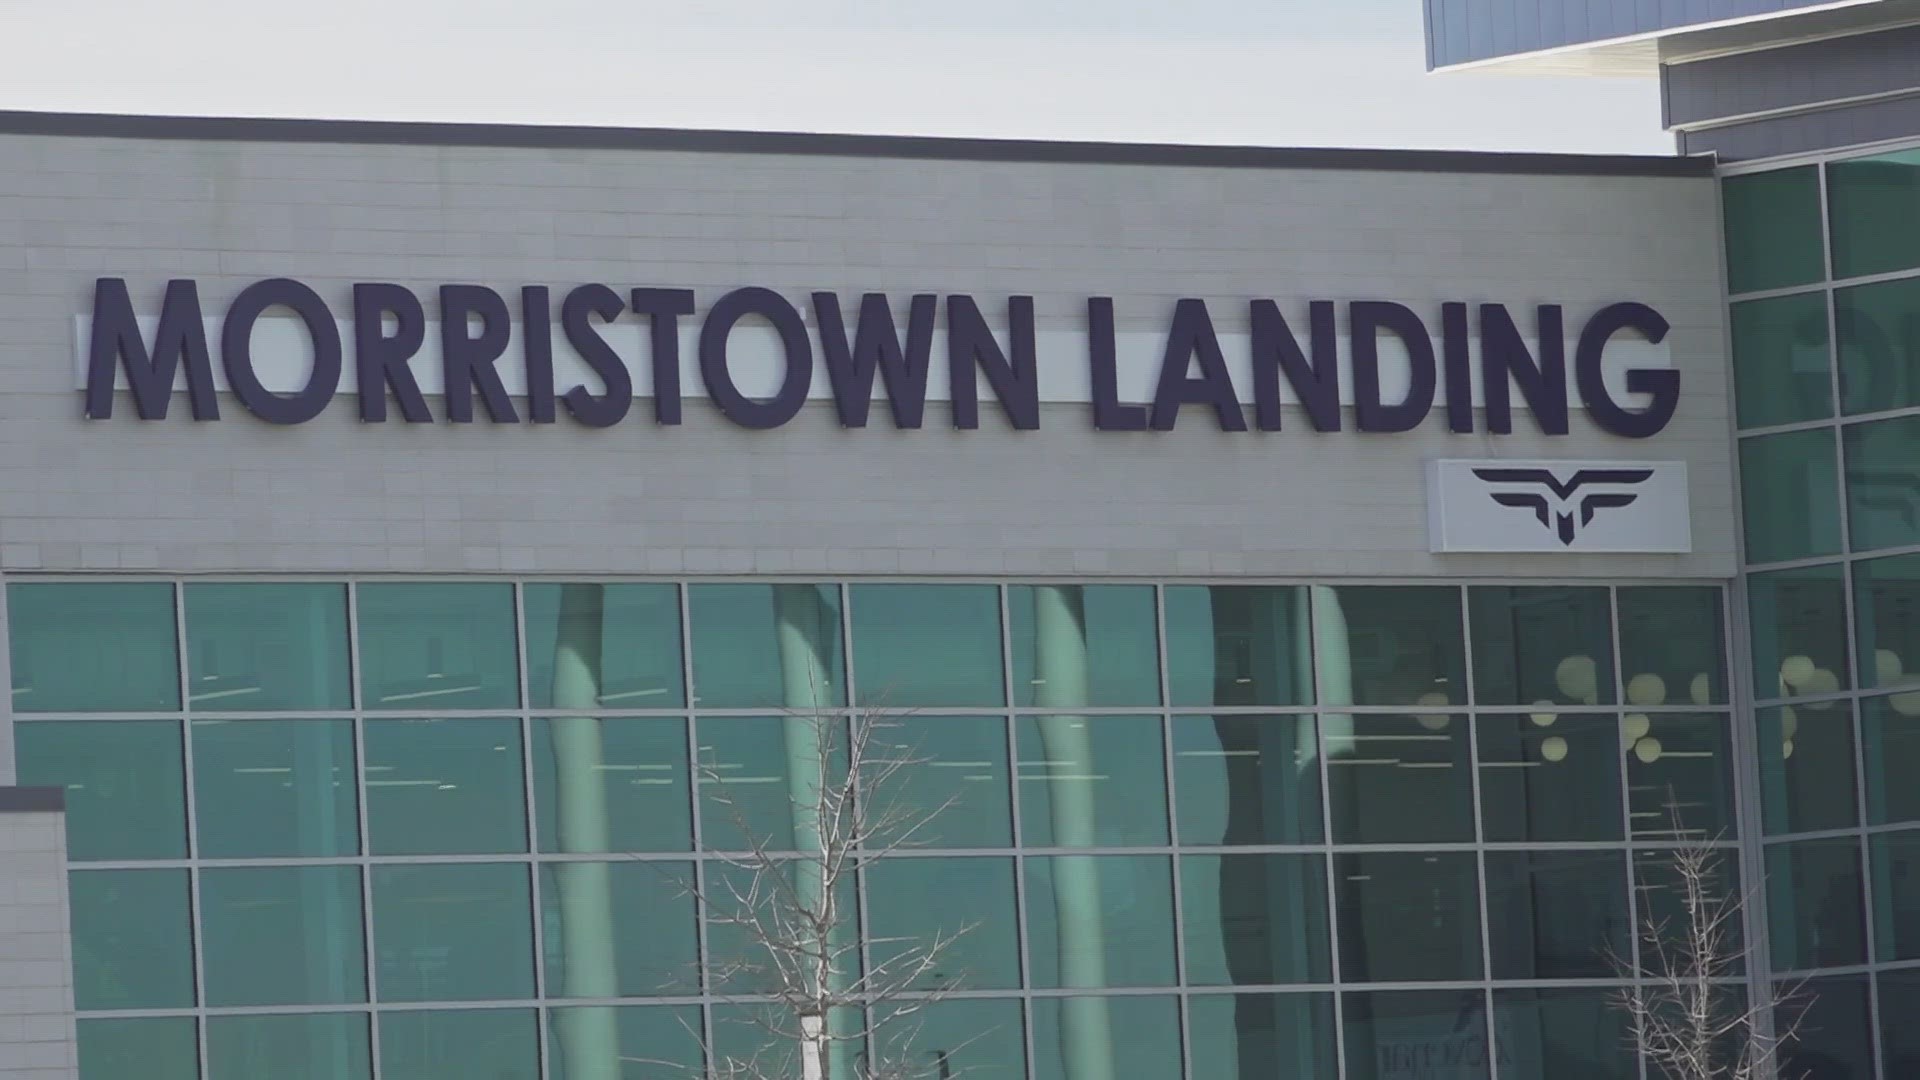 Morristown Landing officially welcomed teams and athletes for the first time at 5:30 a.m. on Tuesday.